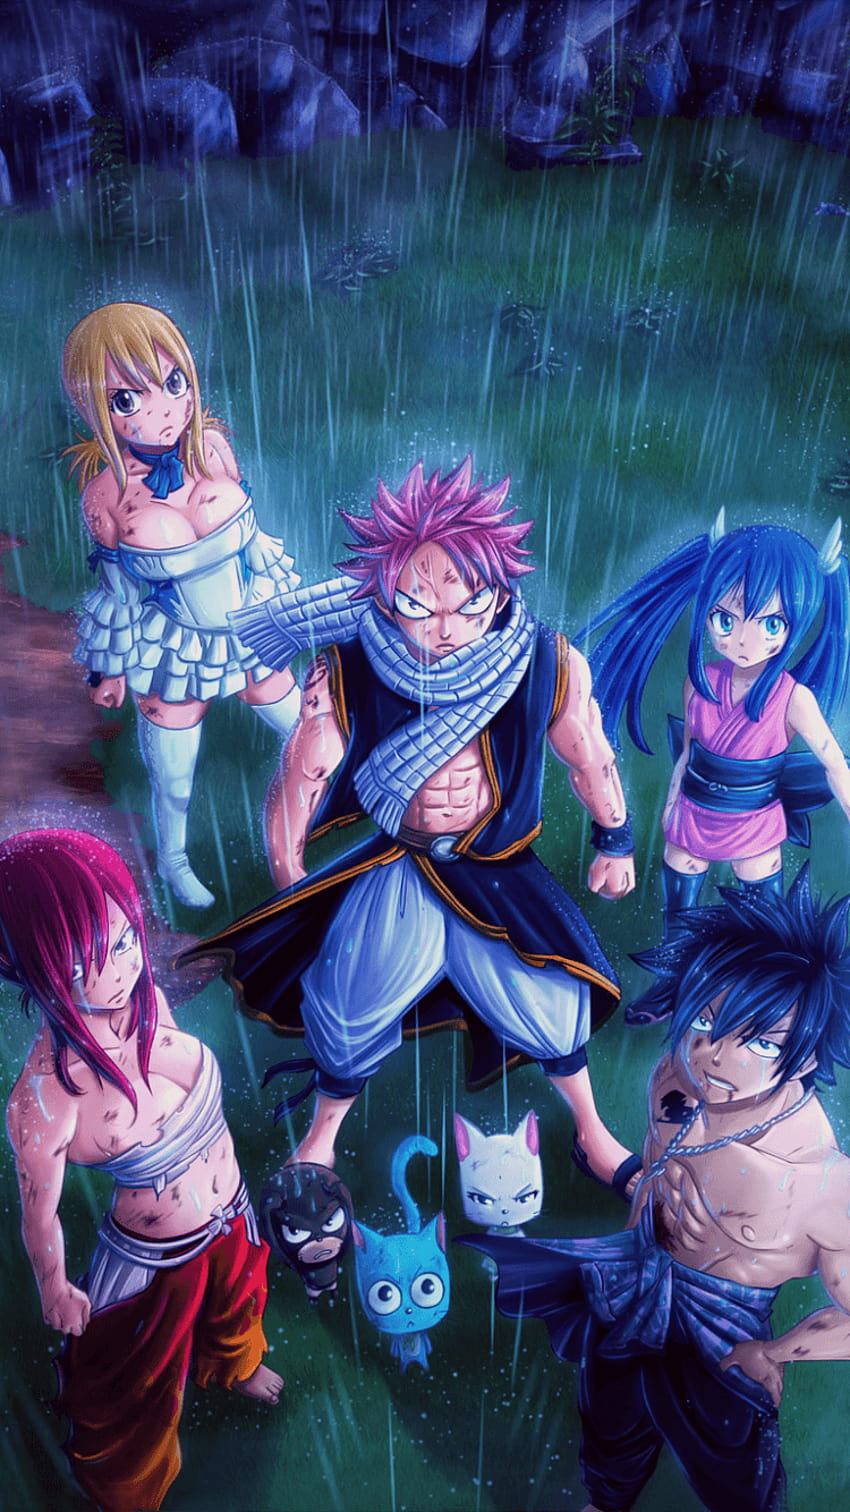 Anime Fairy Tail Erza Scarlet Wendy Marvell Rain Manga Lucy, fairy tail gray HD phone wallpaper